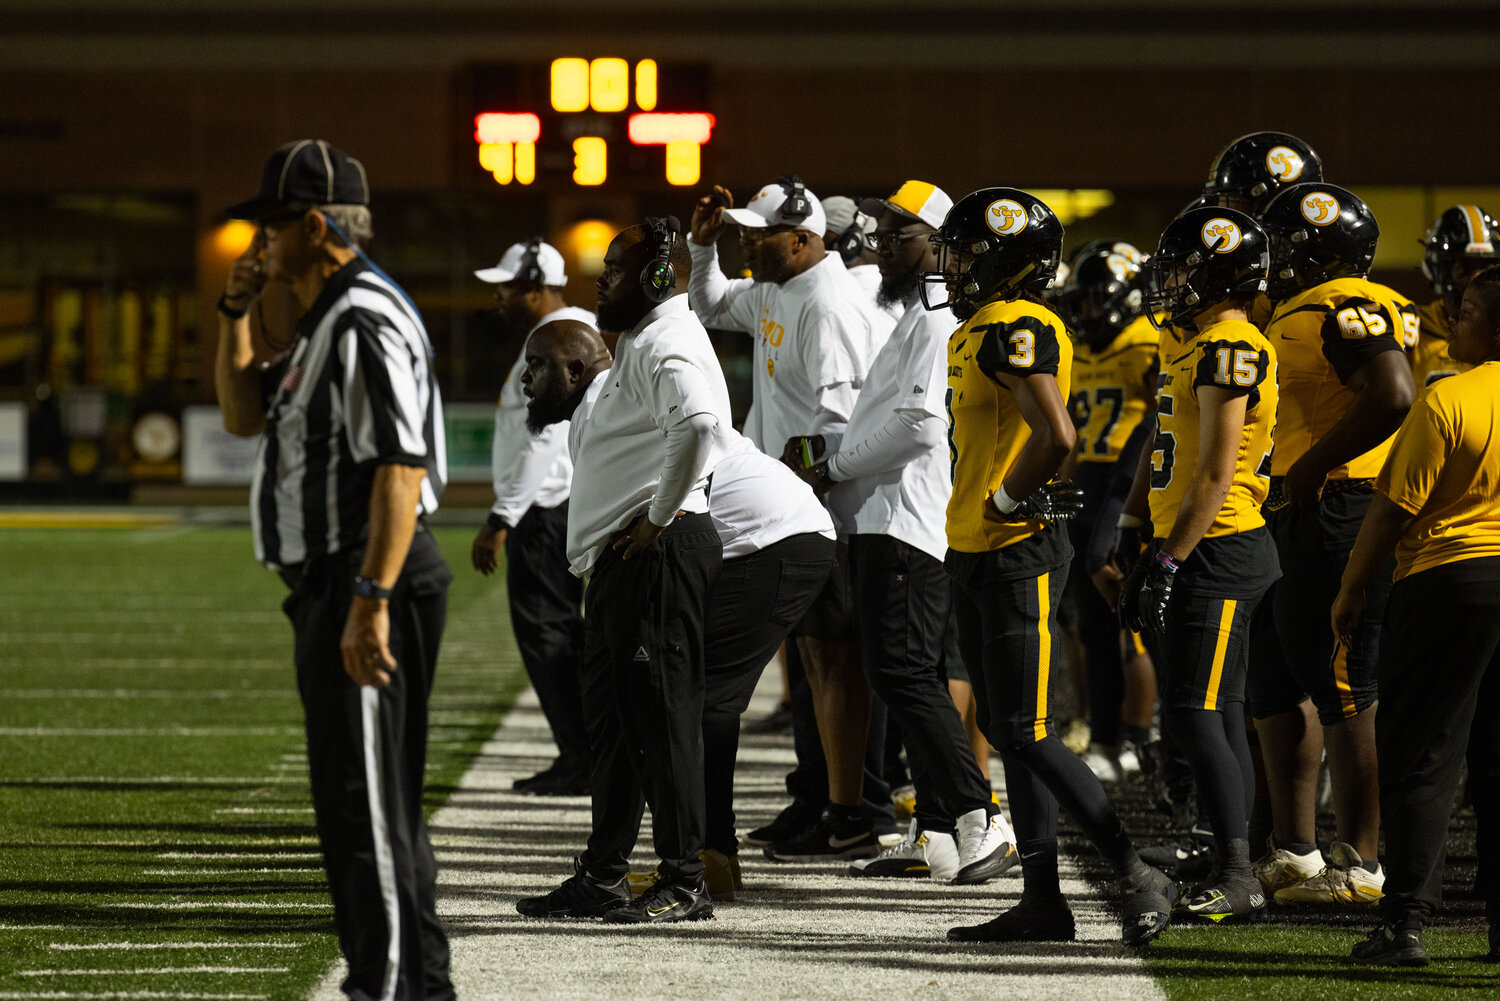 The Irmo coaching staff watches on as the Yellow Jackets took care of business in a 54-0 win over Airport.